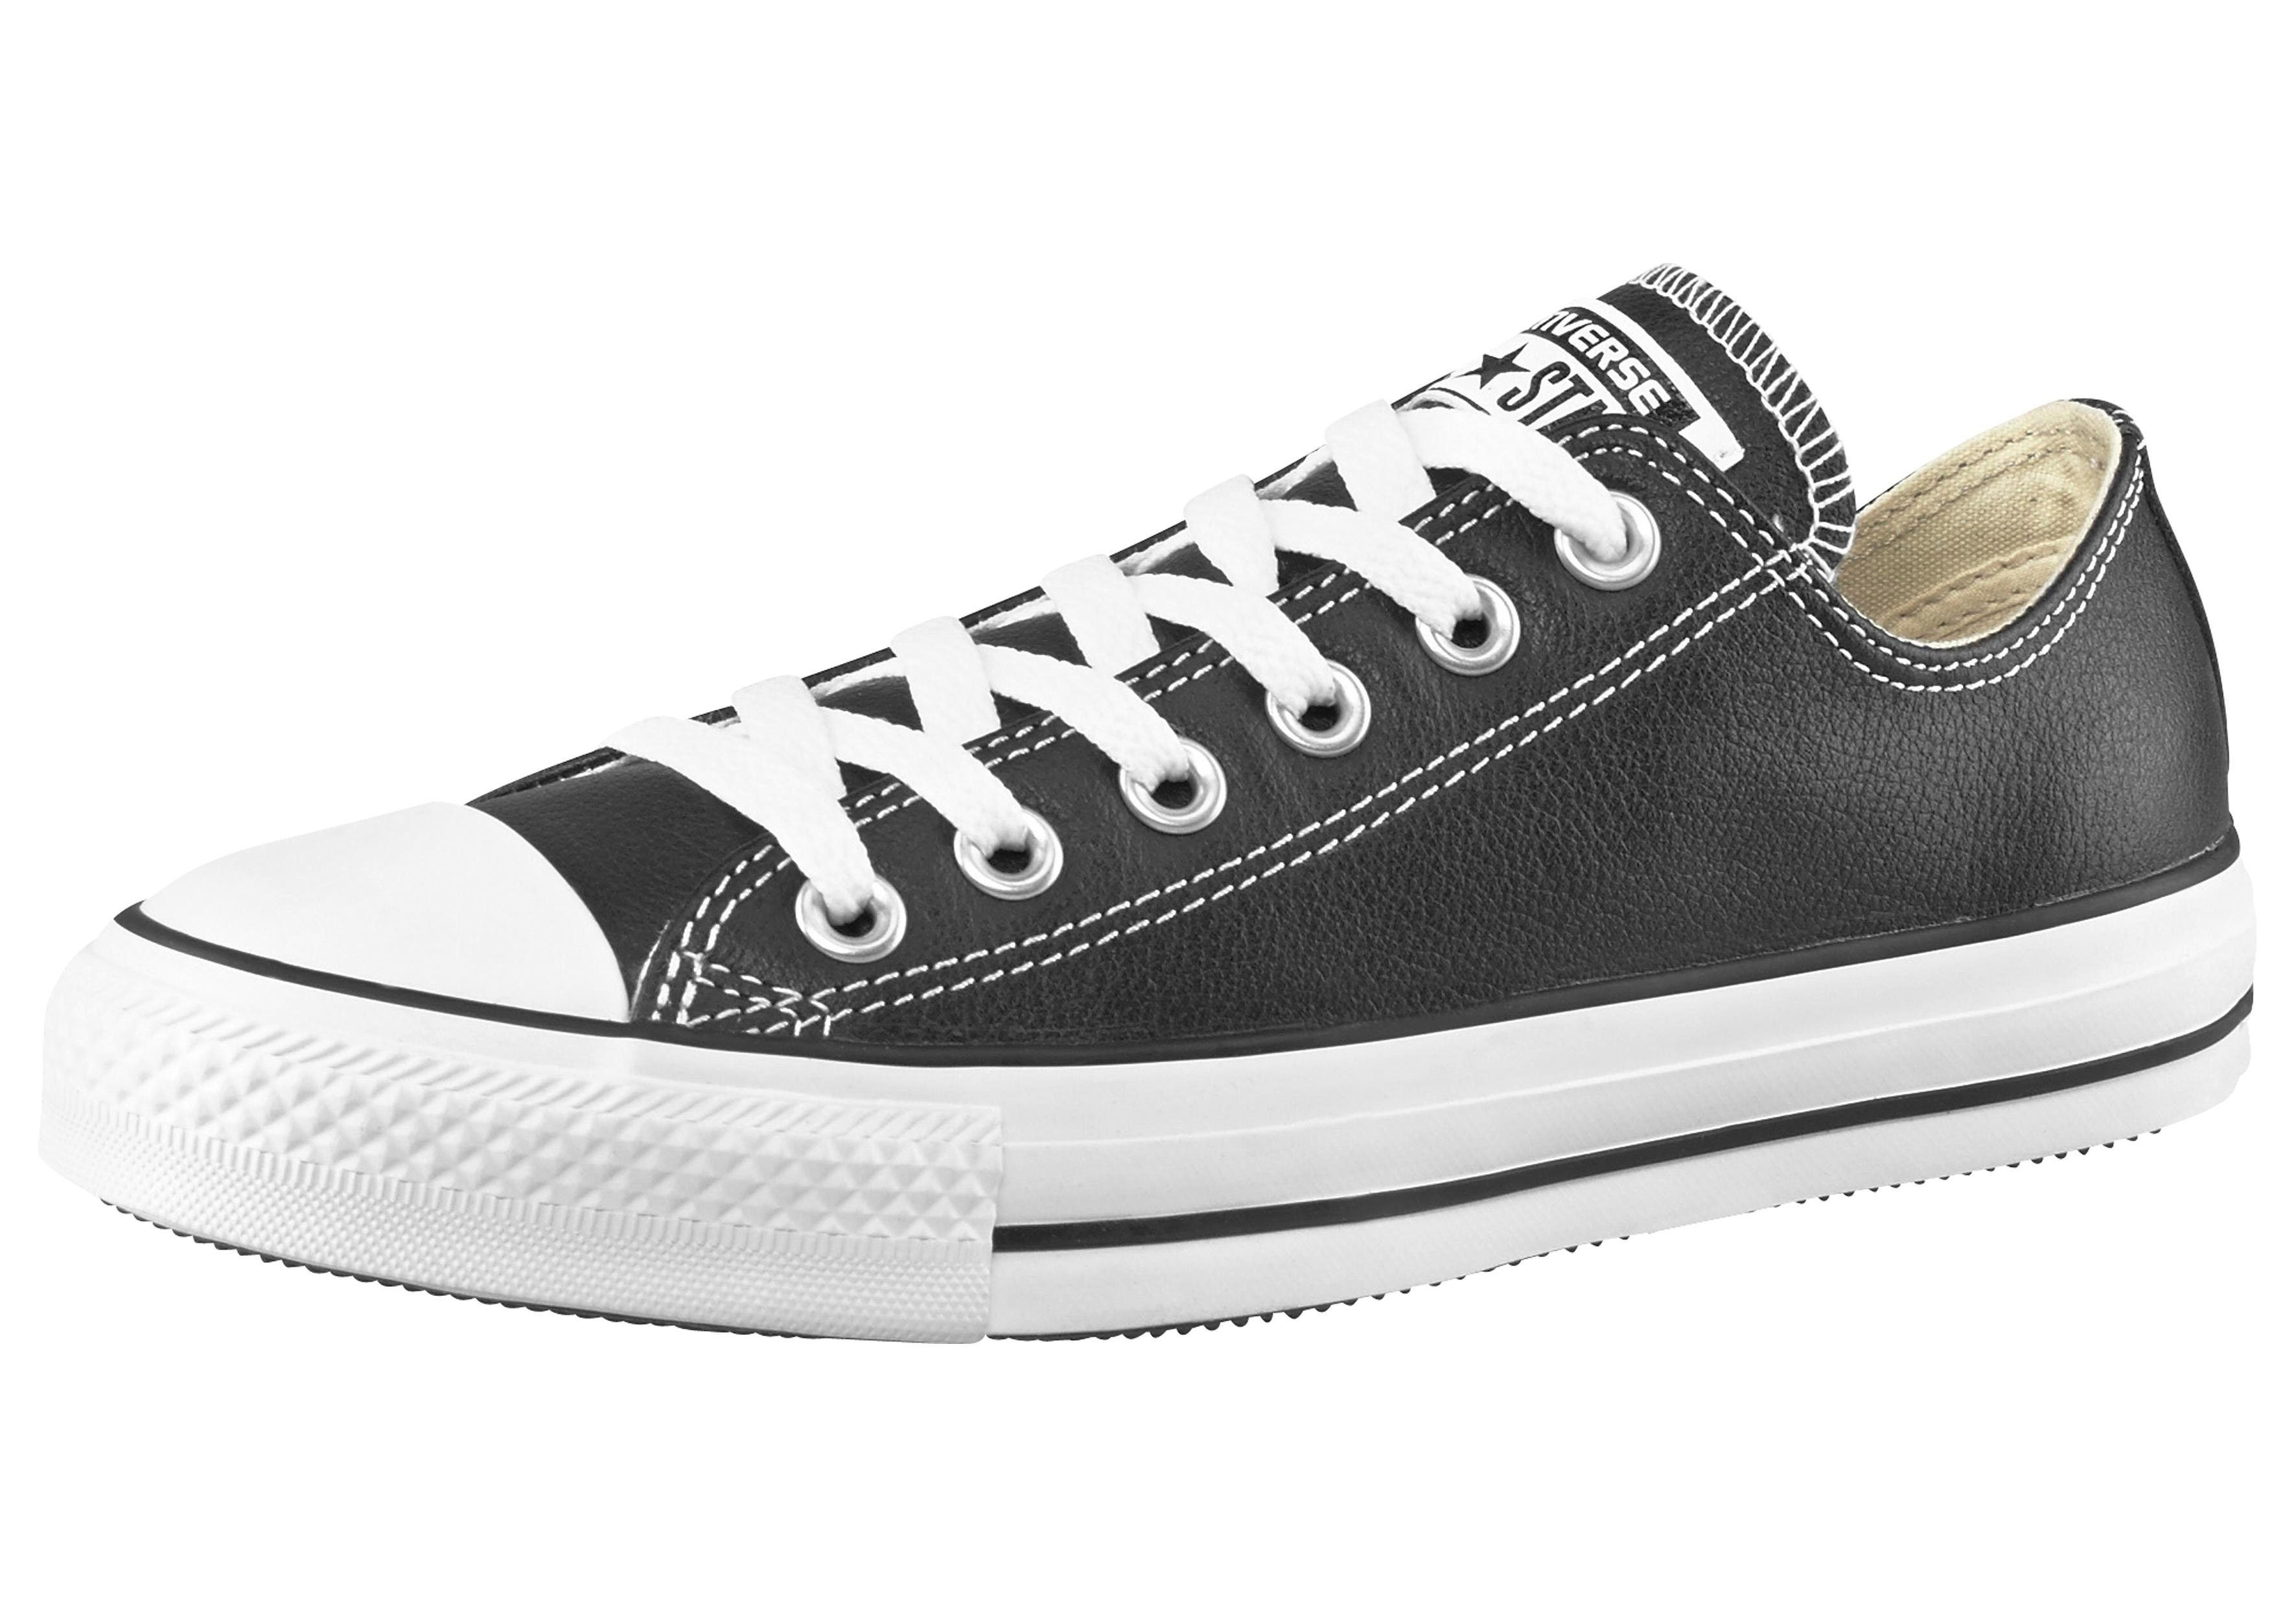 Ox Basic Black All Taylor Star Leather Sneaker Converse Chuck